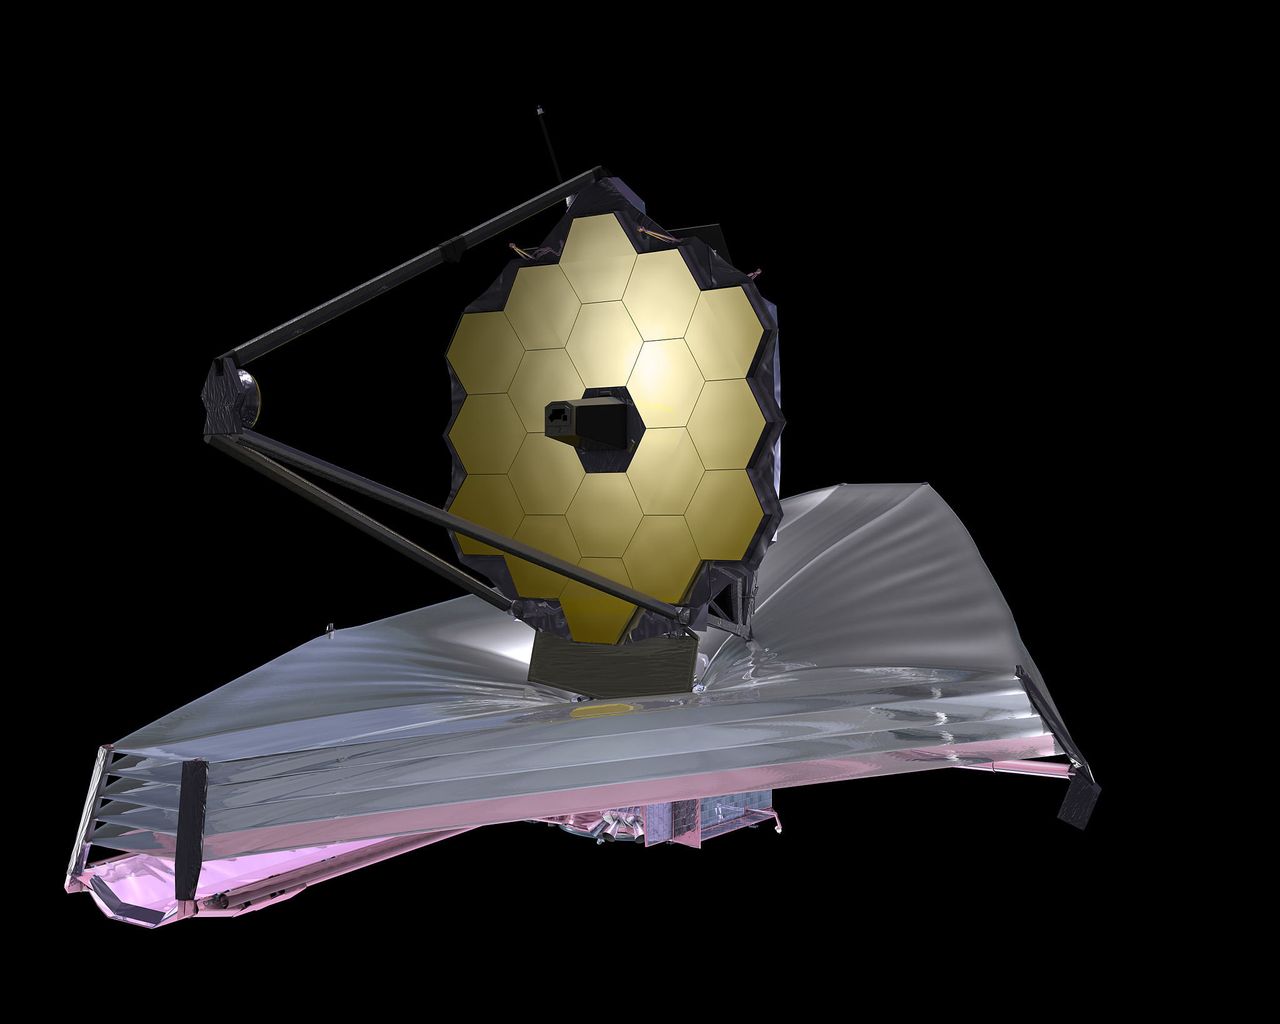 Artist's impression of the James Webb Space Telescope.